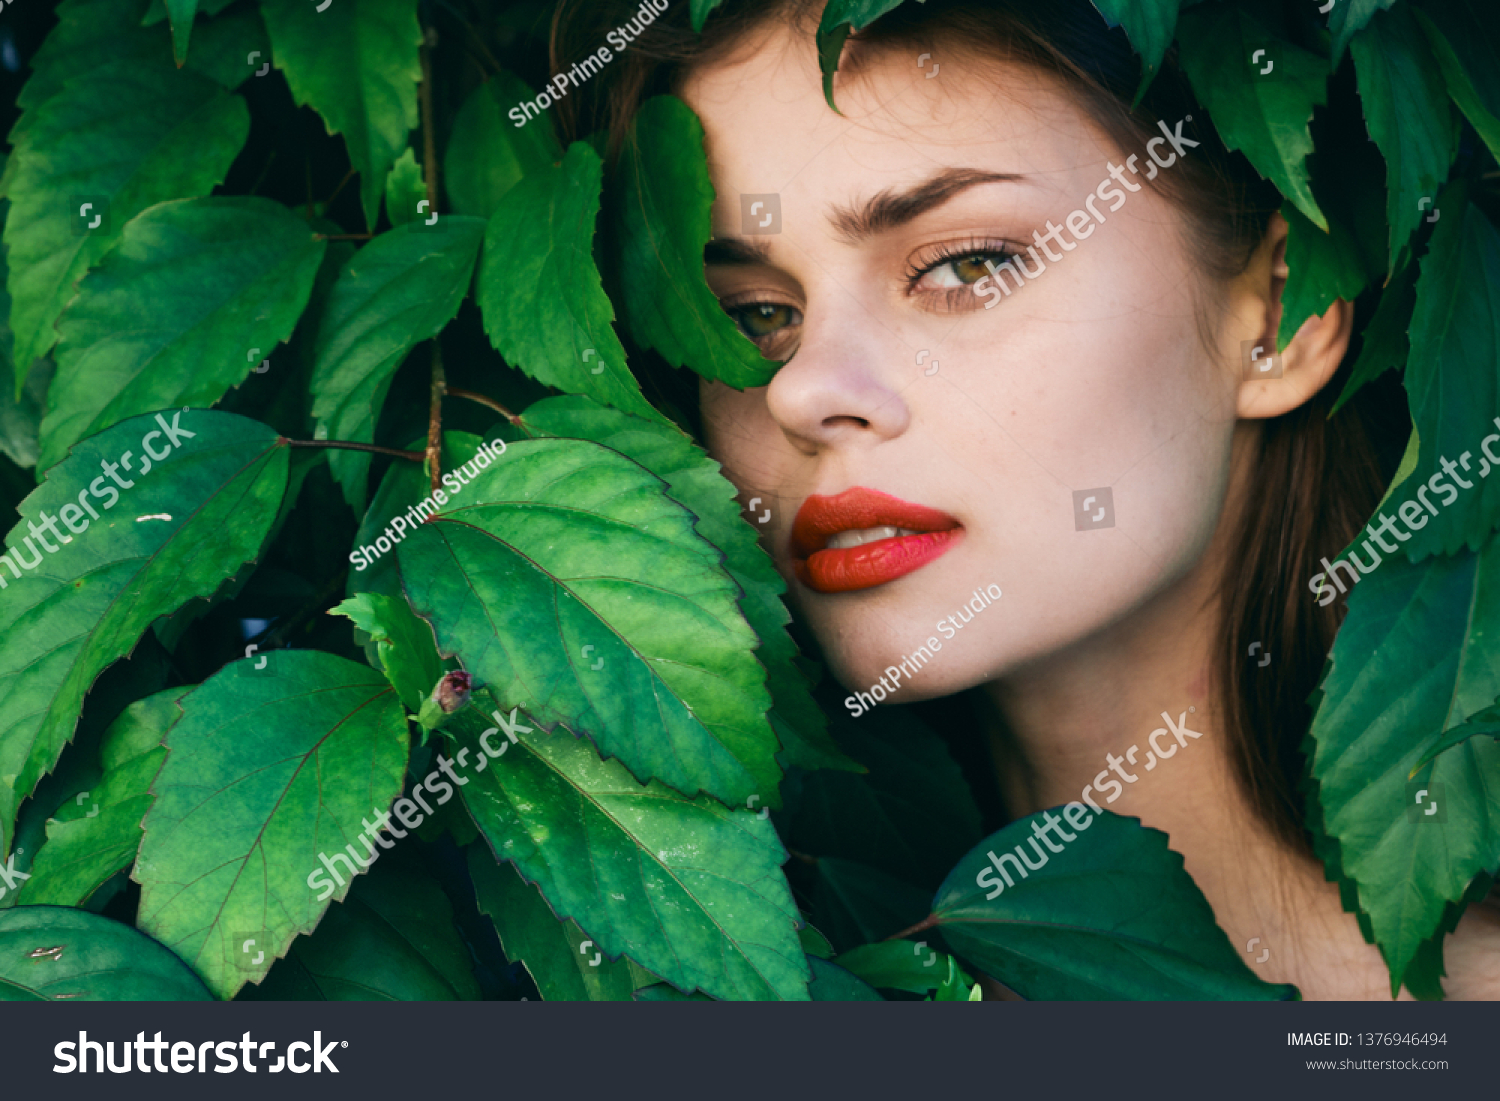 pretty woman with make up on face green shrub exotic nature #1376946494